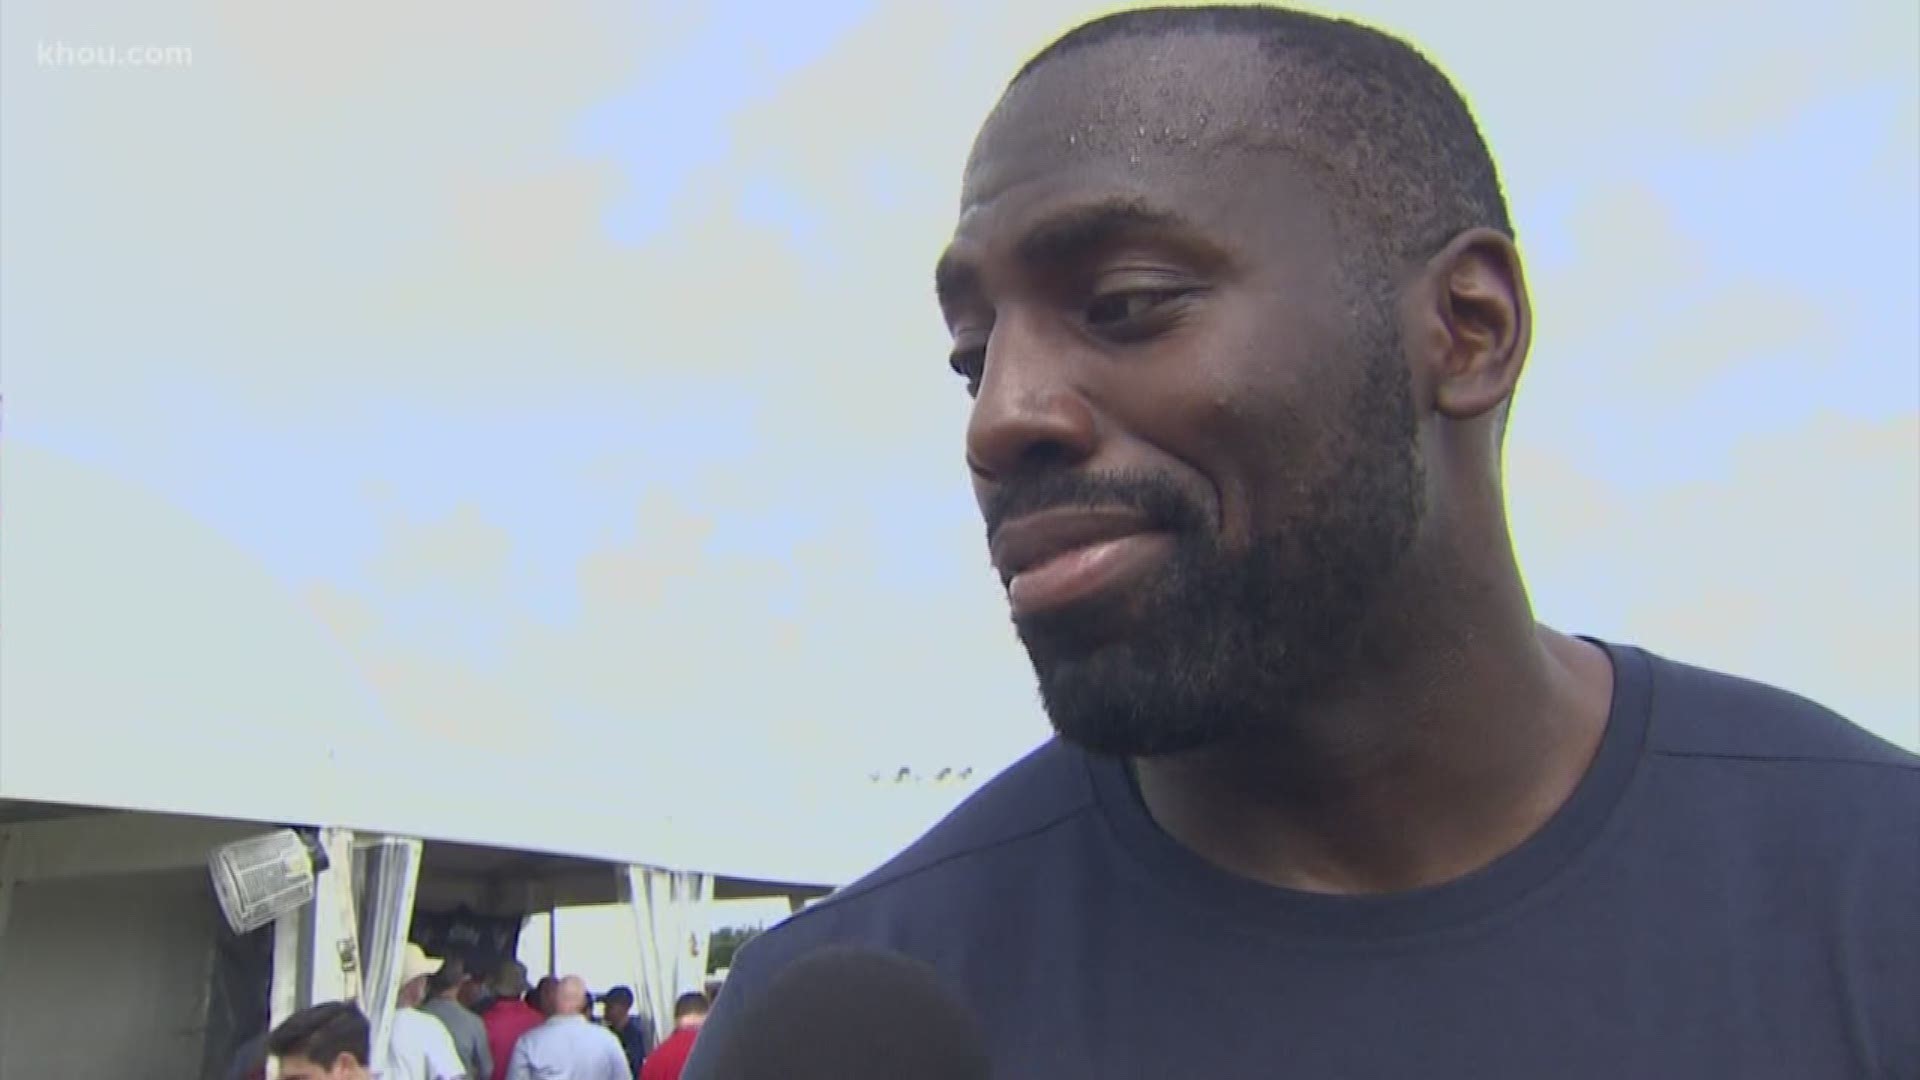 KHOU 11 Sports' Daniel Gotera asked starting Houston texans linebacker Whitney Mercilus some "tough" questions at training camp.